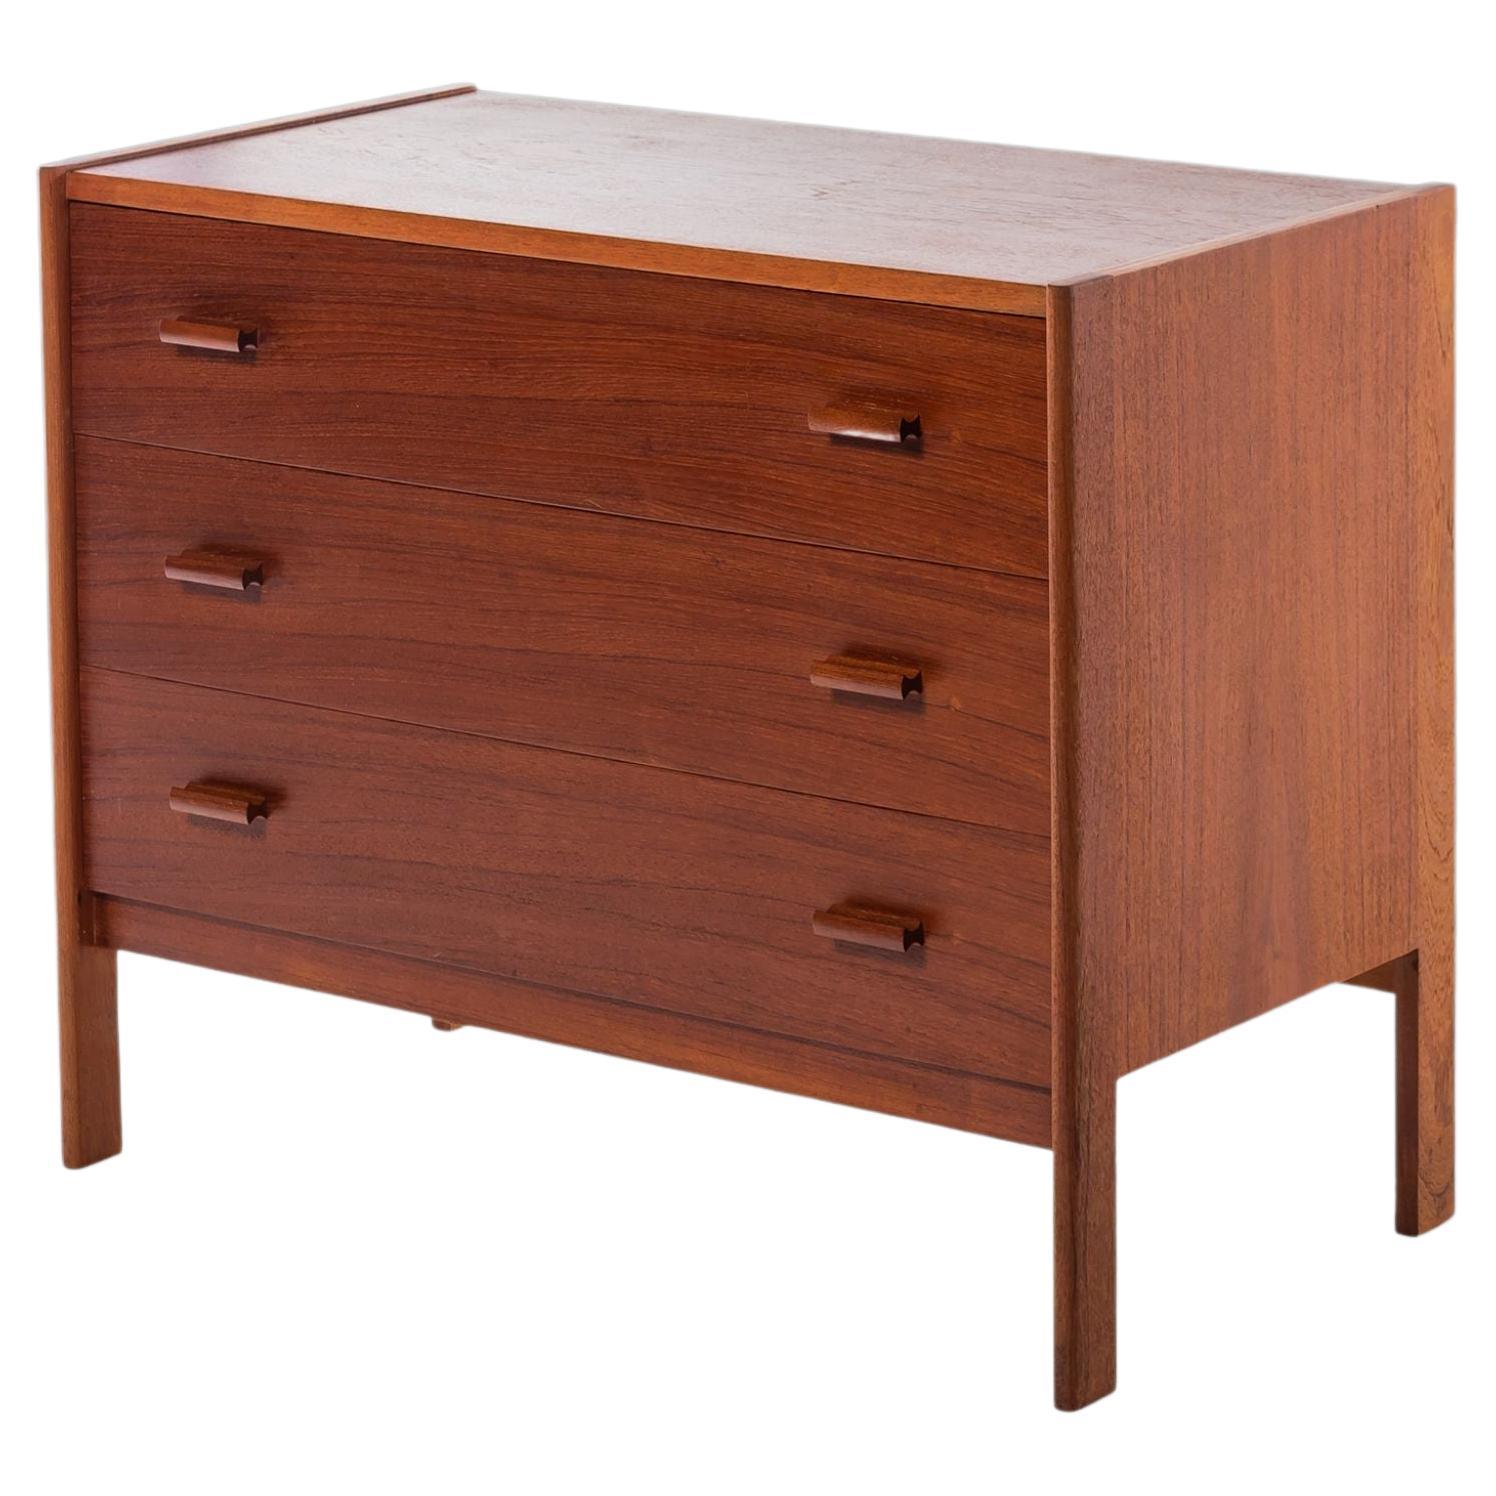 Danish Modern Chest of Drawers / Three '3' Drawer Dresser by Vitre, c. 1970s For Sale